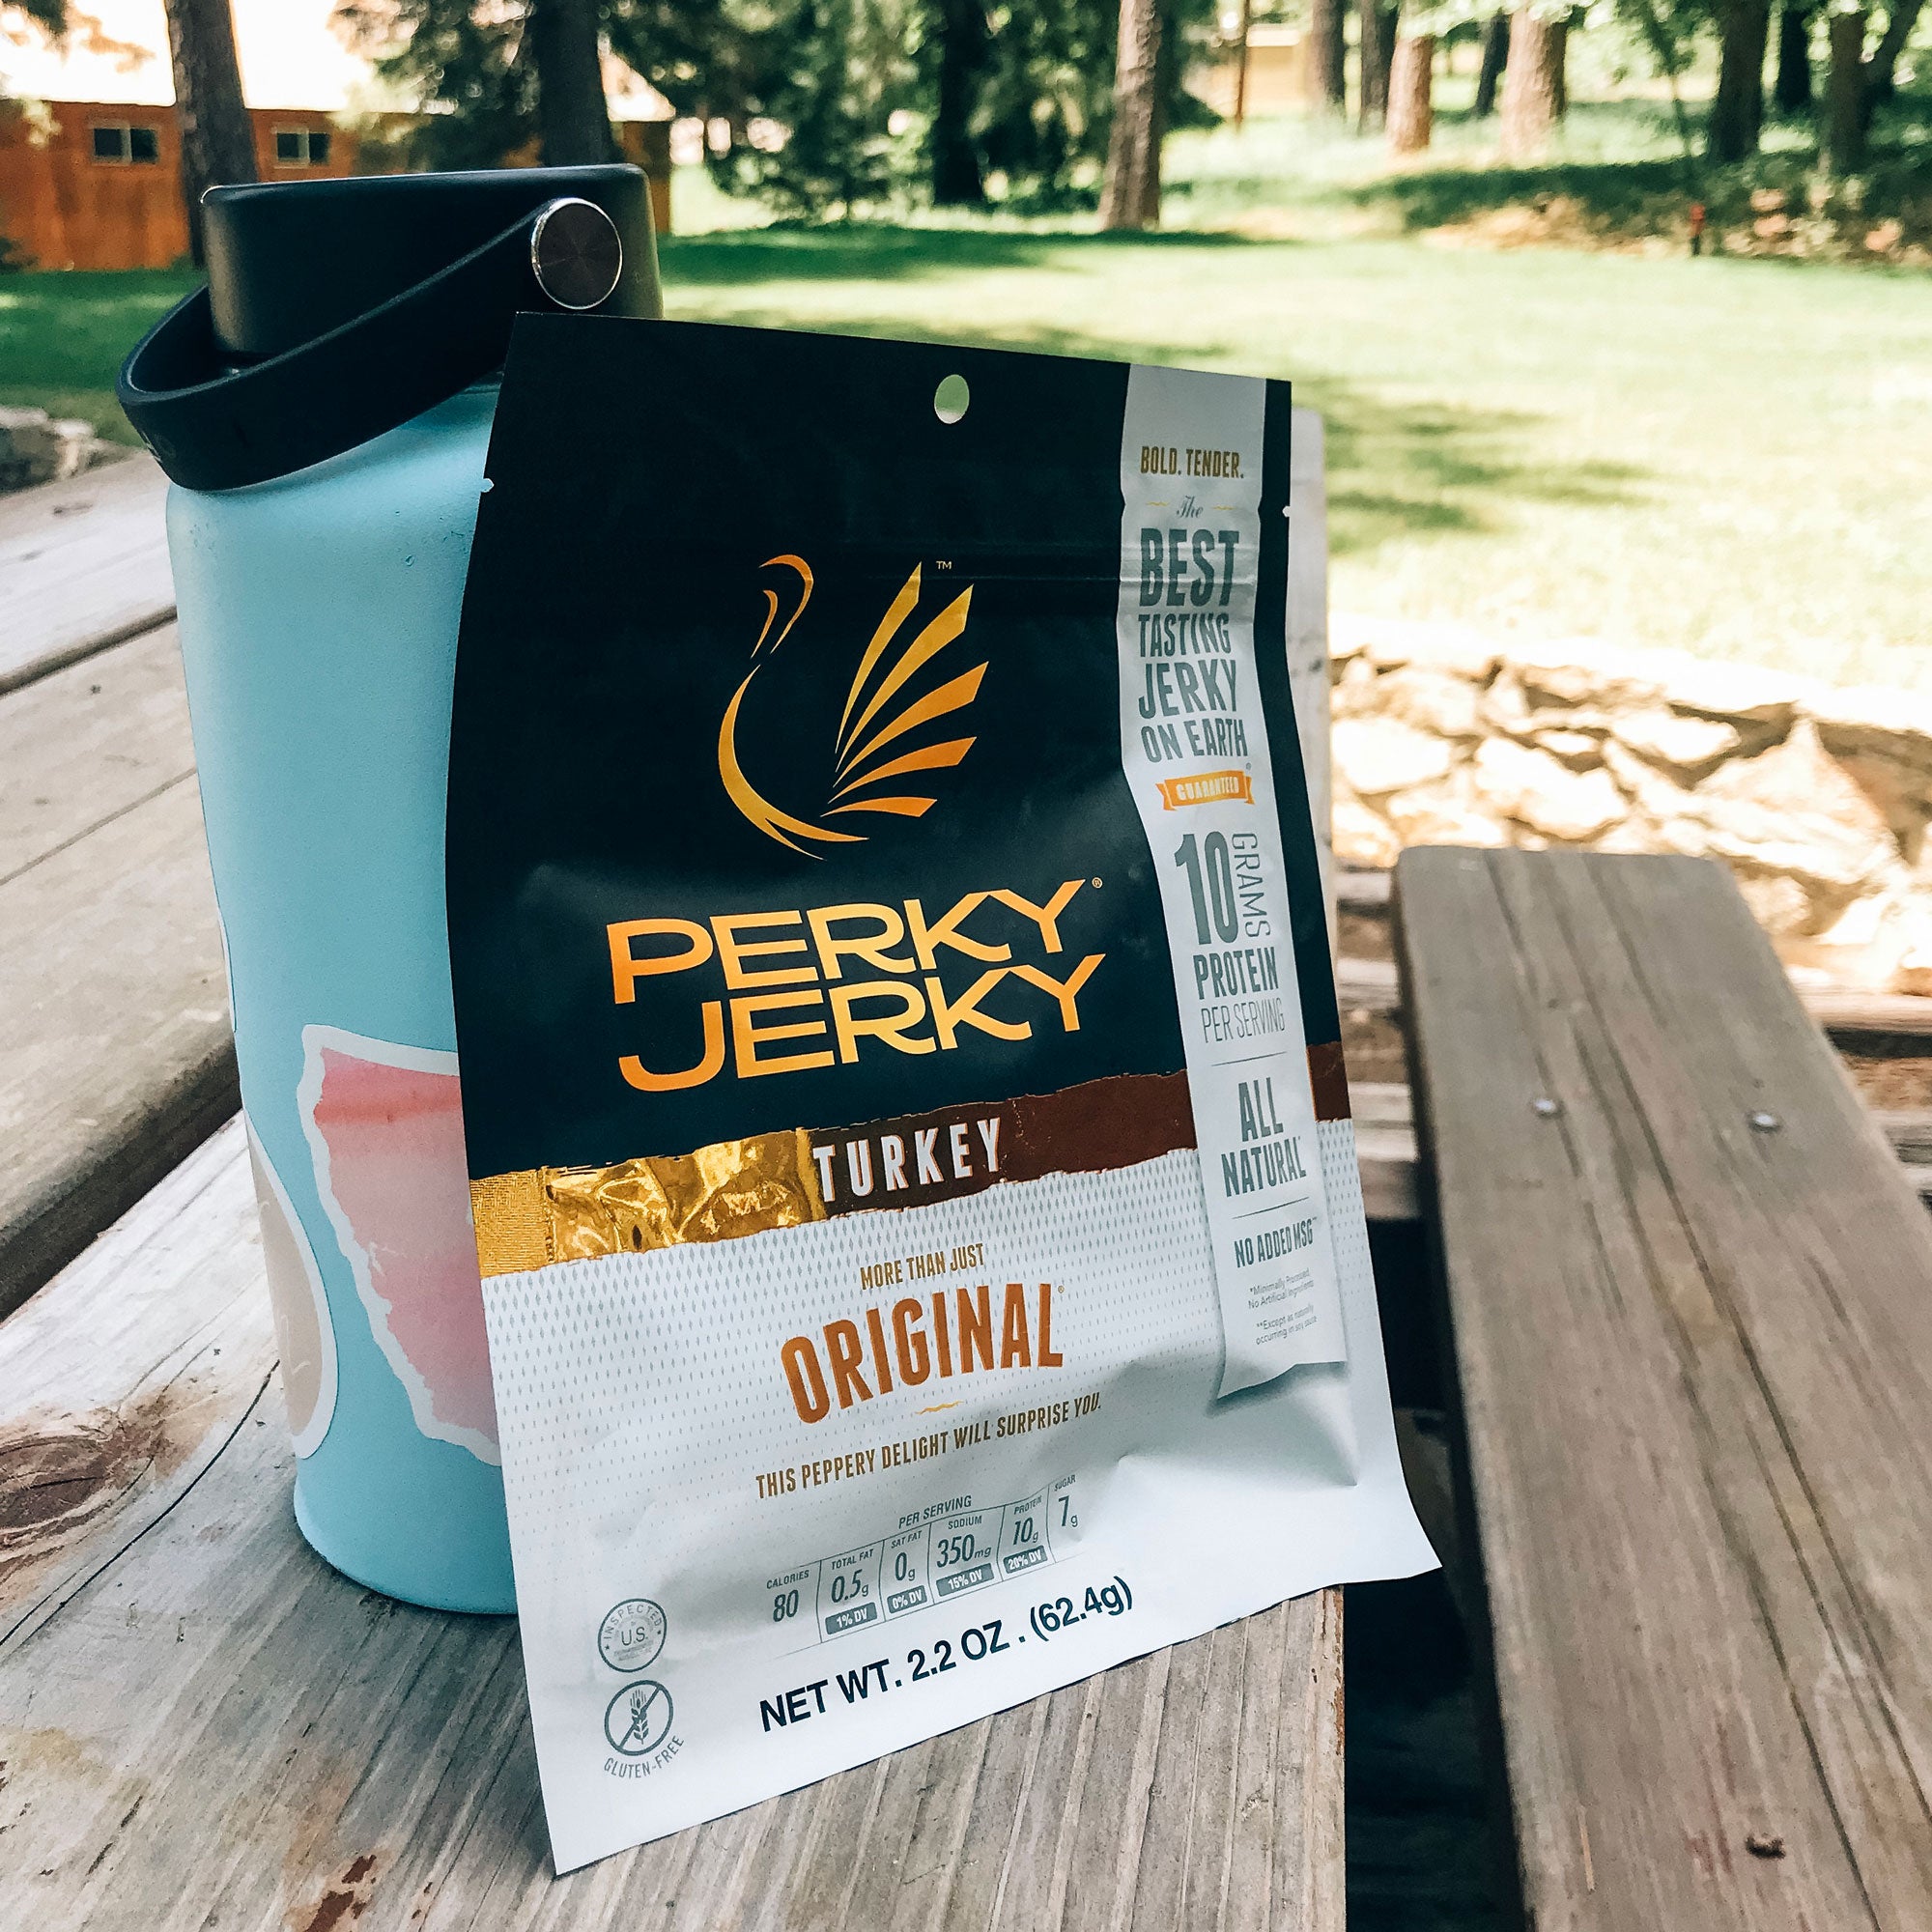 Perky Jerky More Than Just Original Turkey makes an excellent snack!